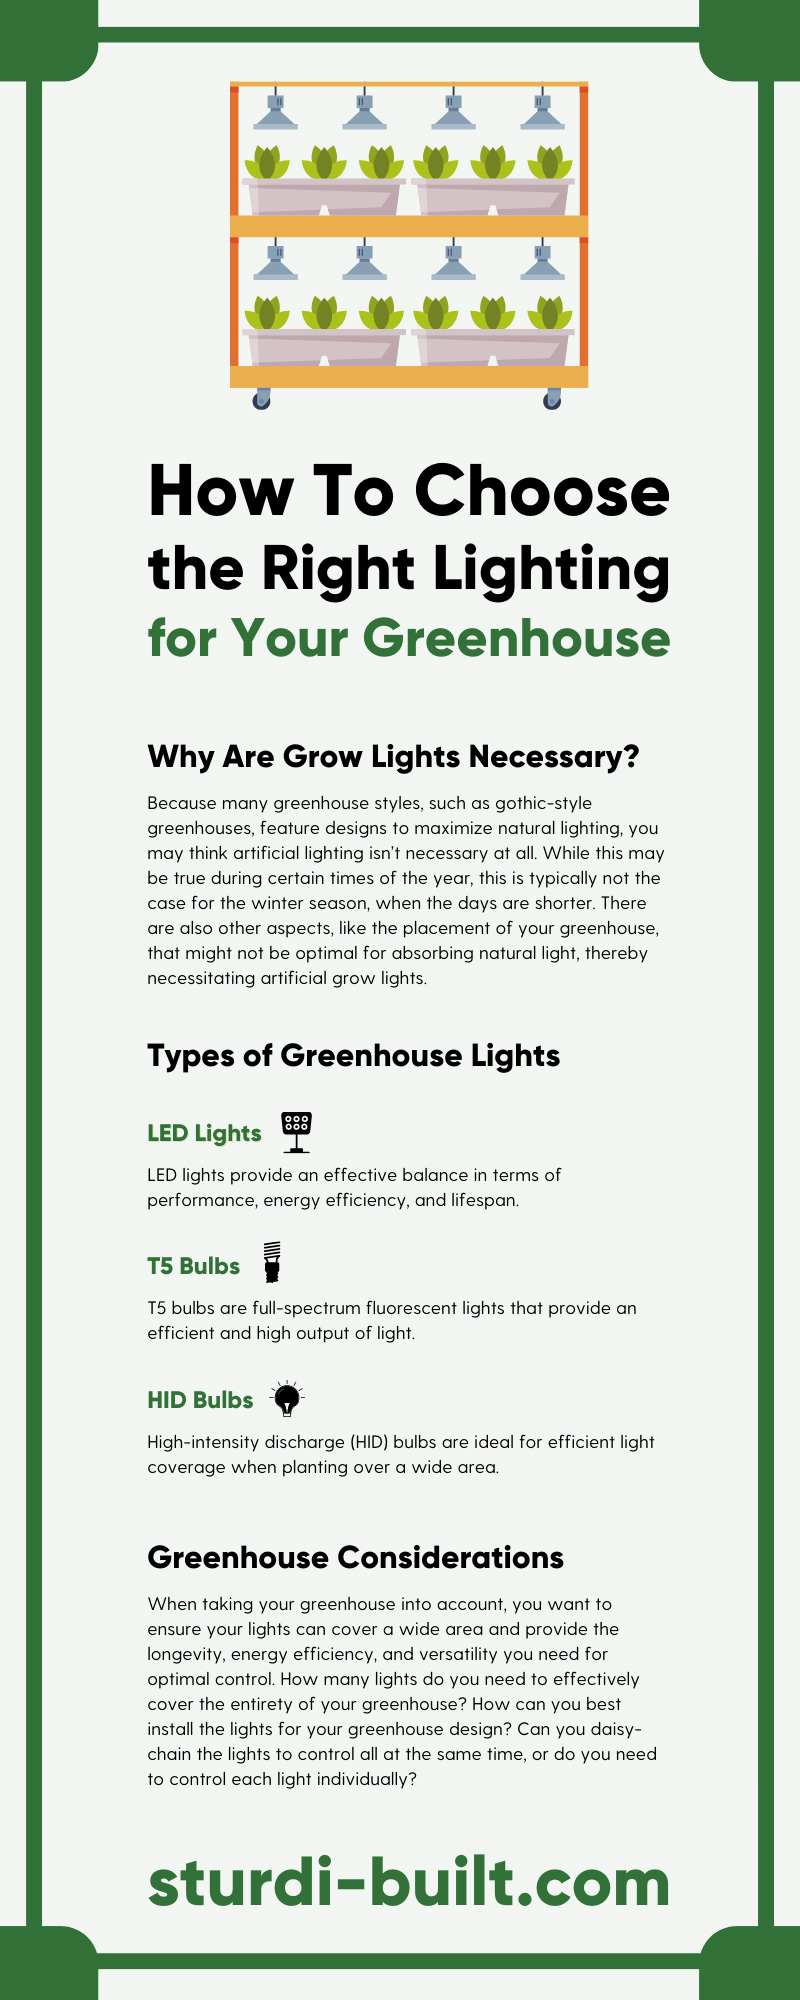 How To Choose the Right Lighting for Your Greenhouse